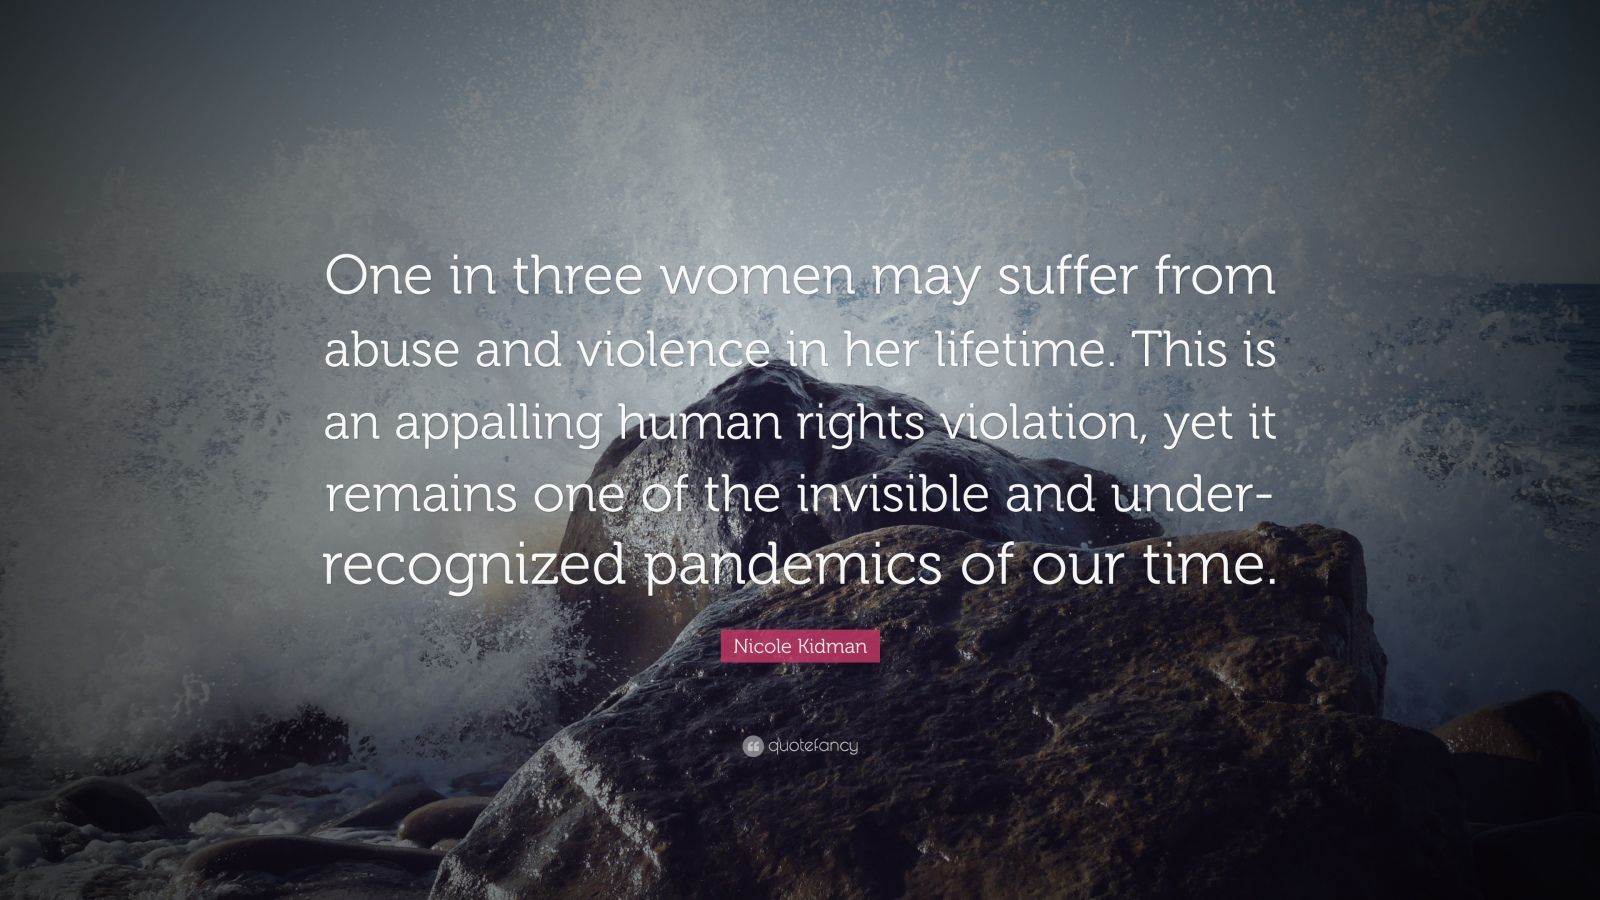 Nicole Kidman Quote: “One in three women may suffer from abuse and ...